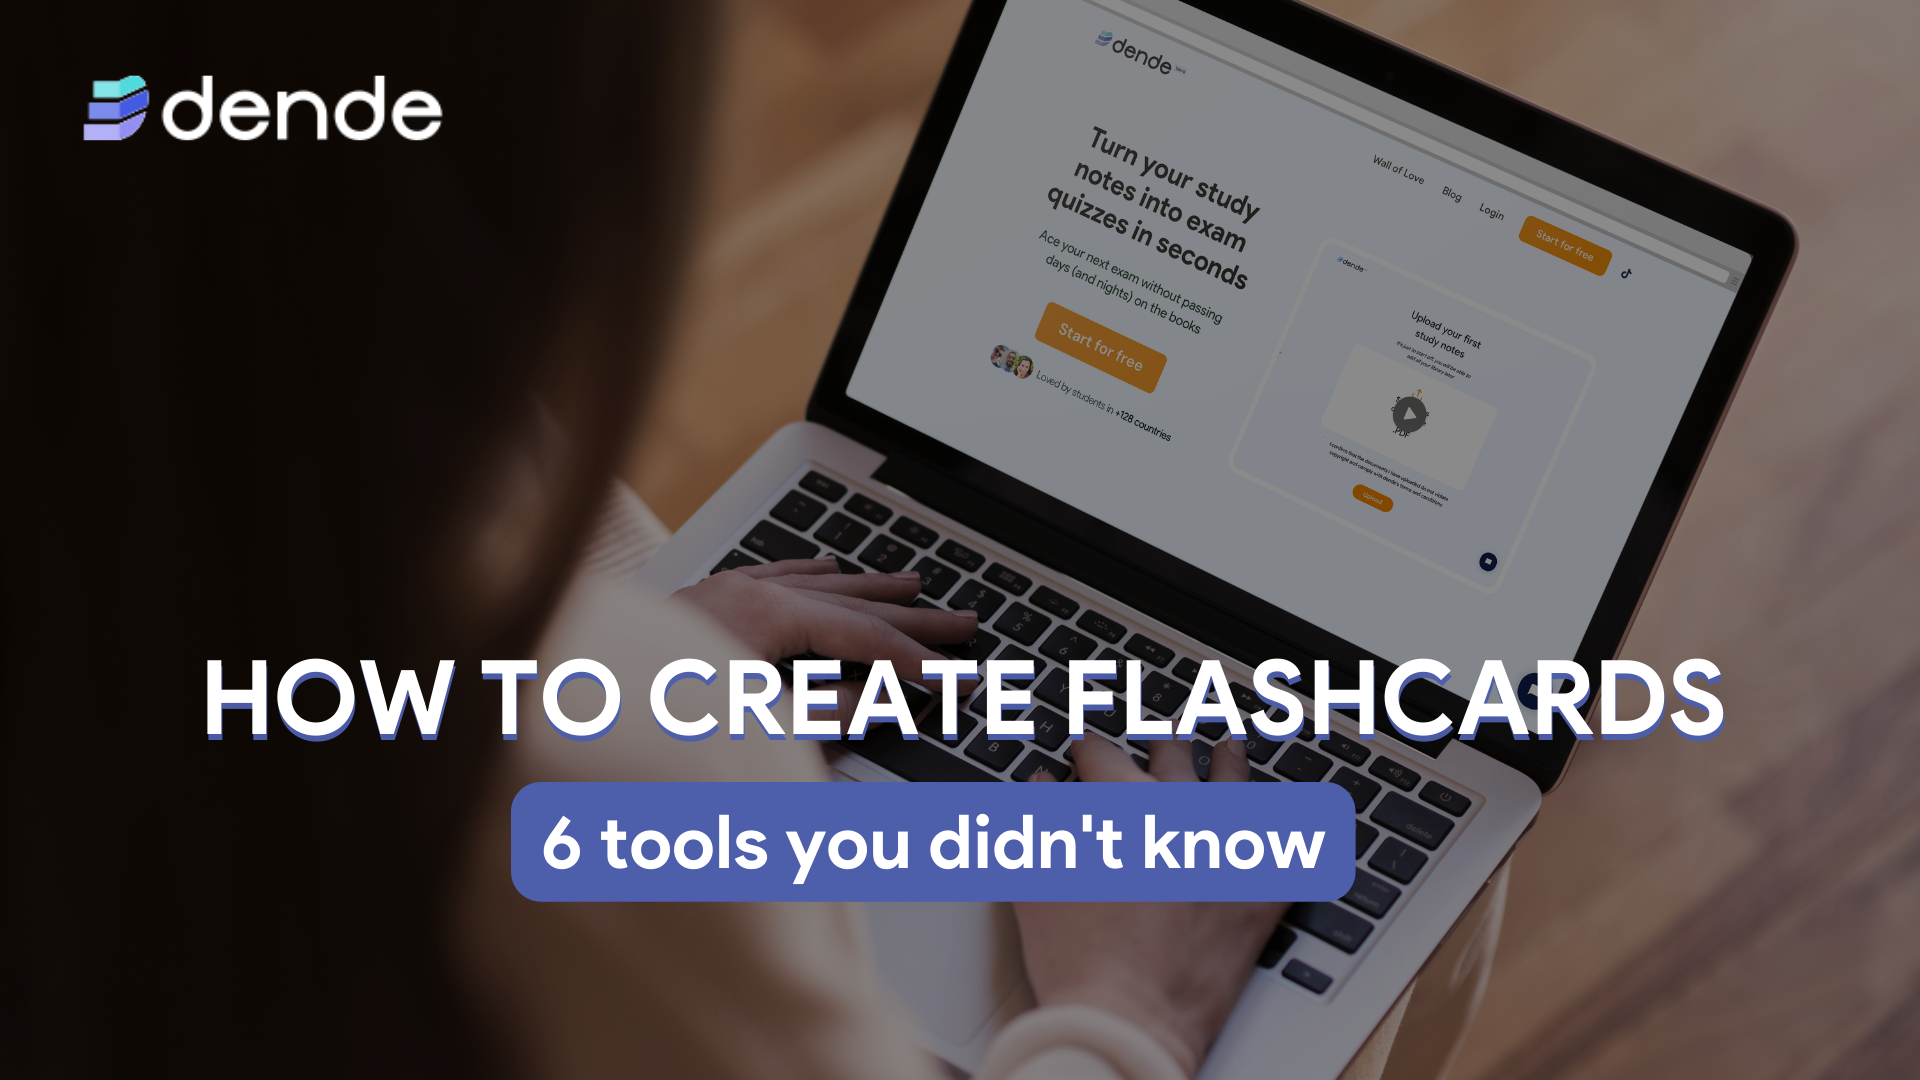 How to create flashcards for studying: 6 tools to save time